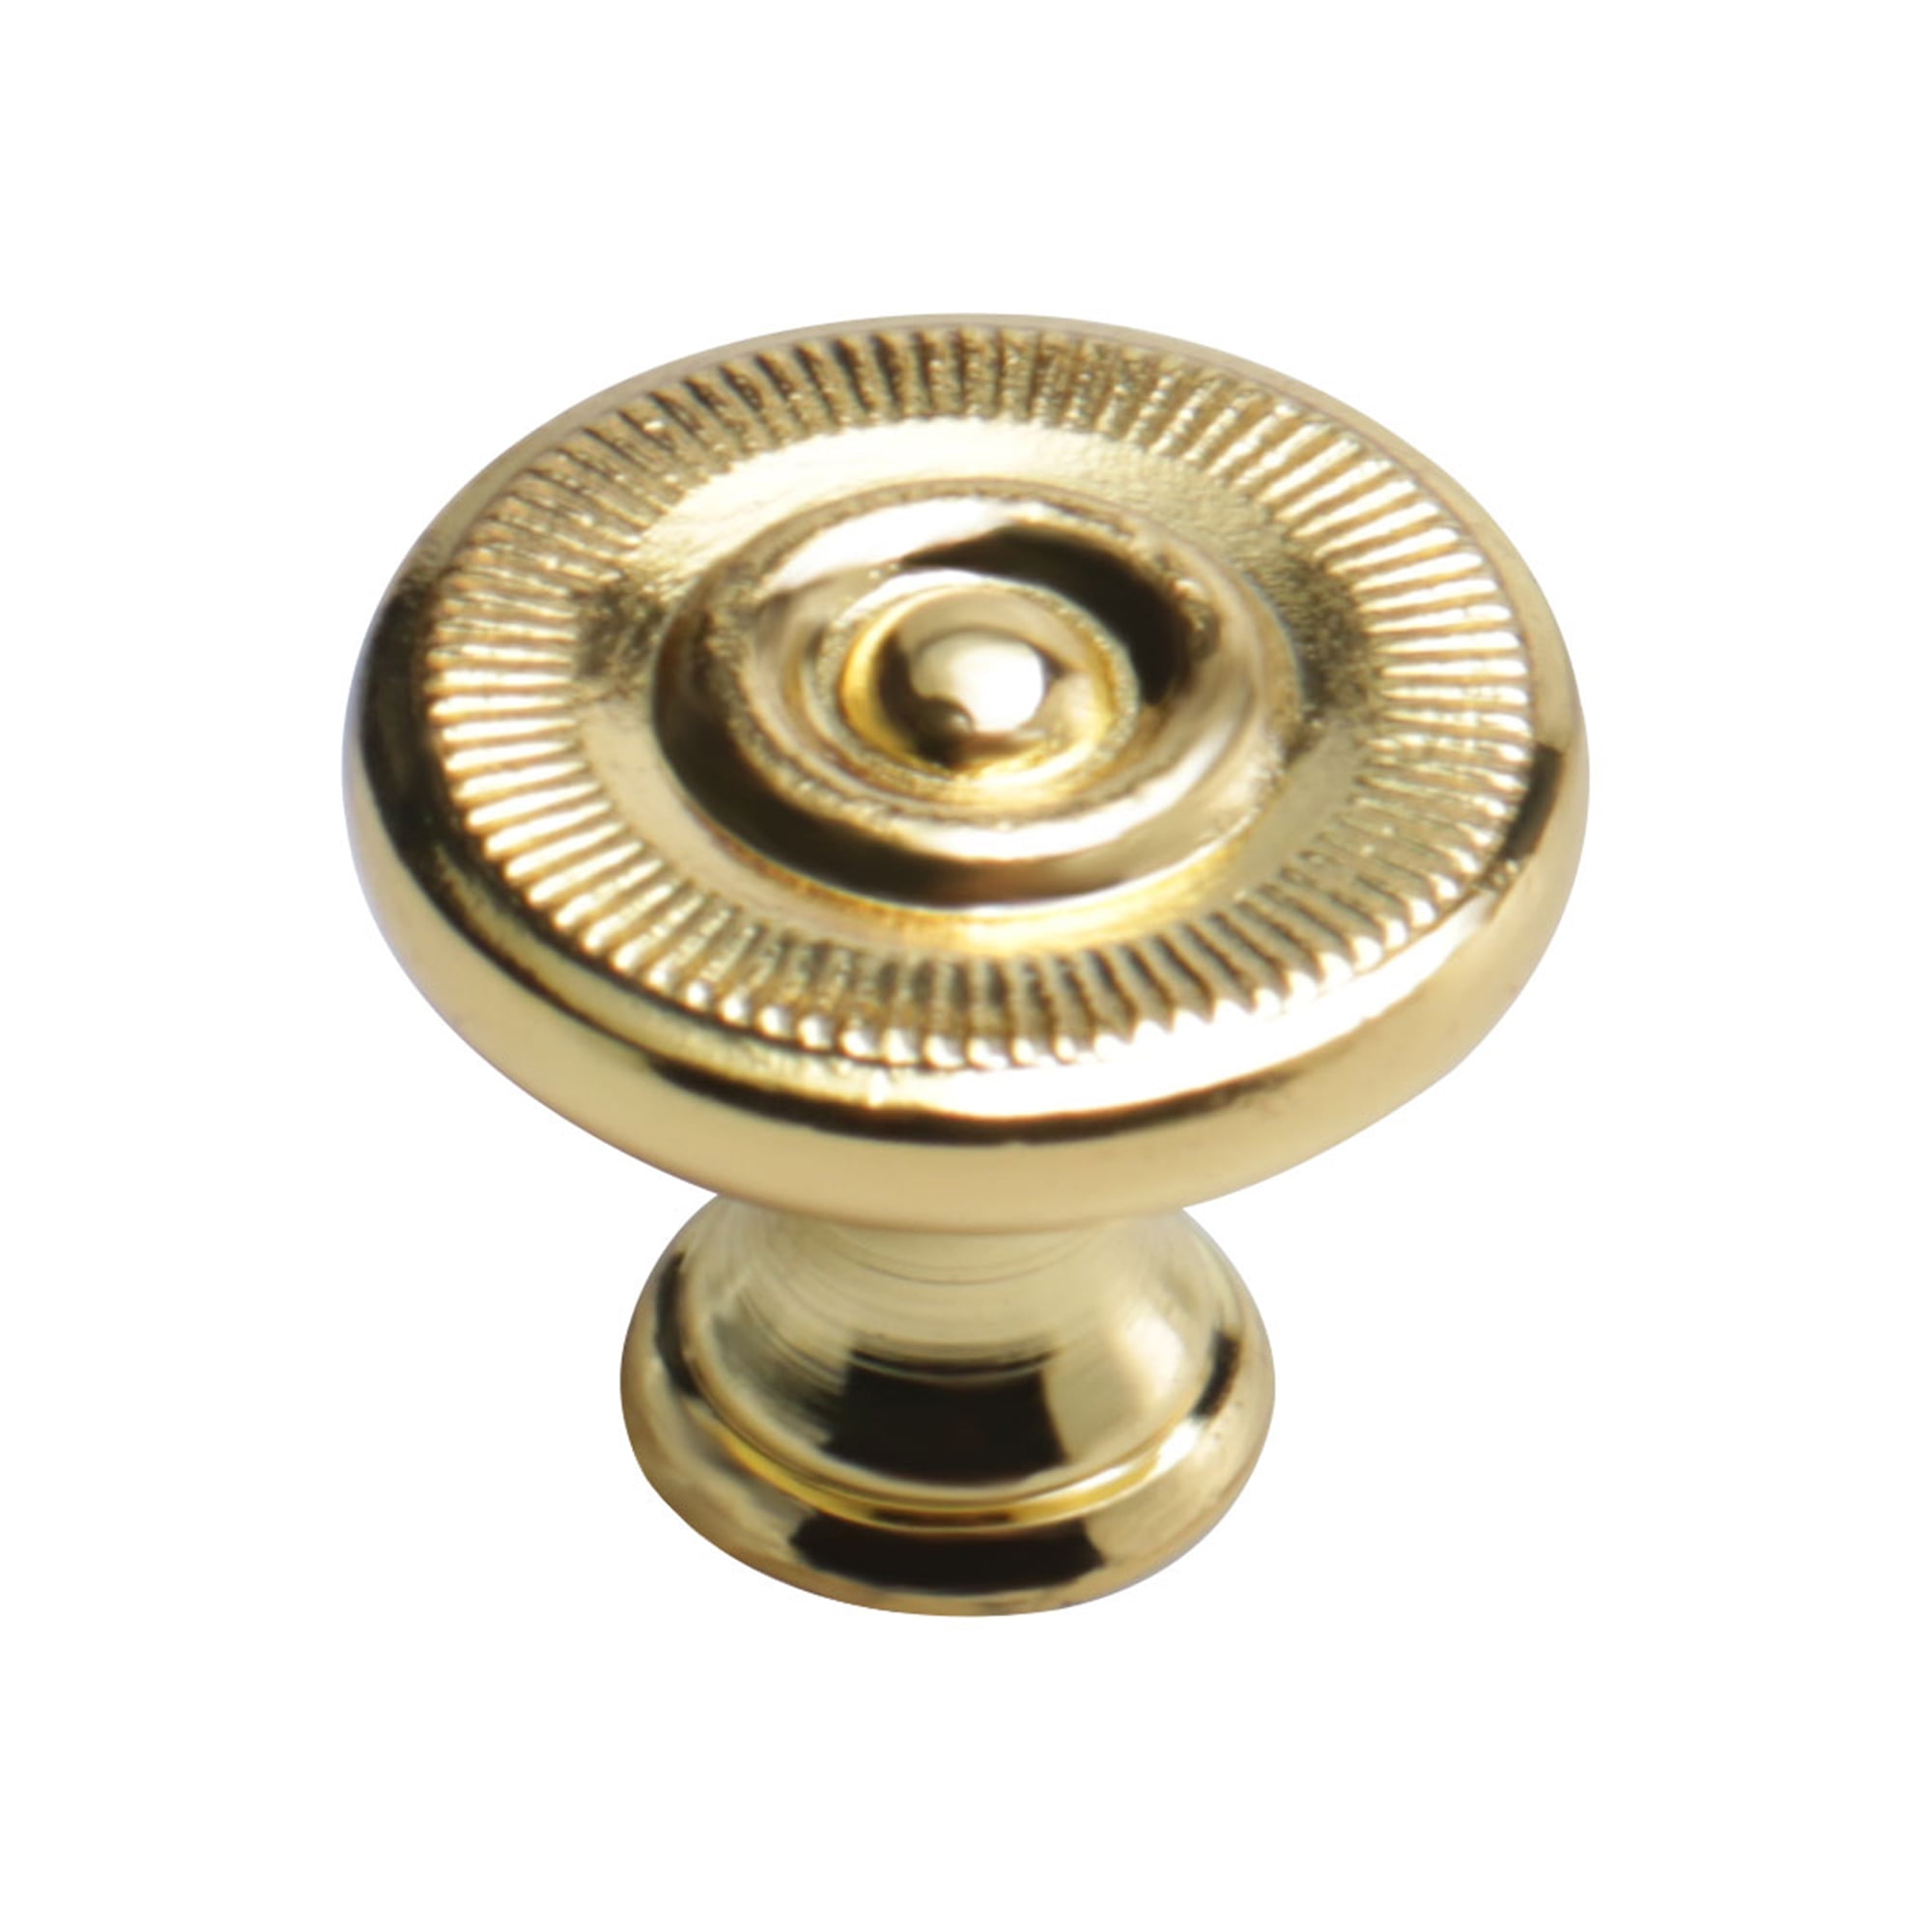 Zinc Alloy Knobs 26mm Round Dresser Knobs Pull Handle For Cupboard